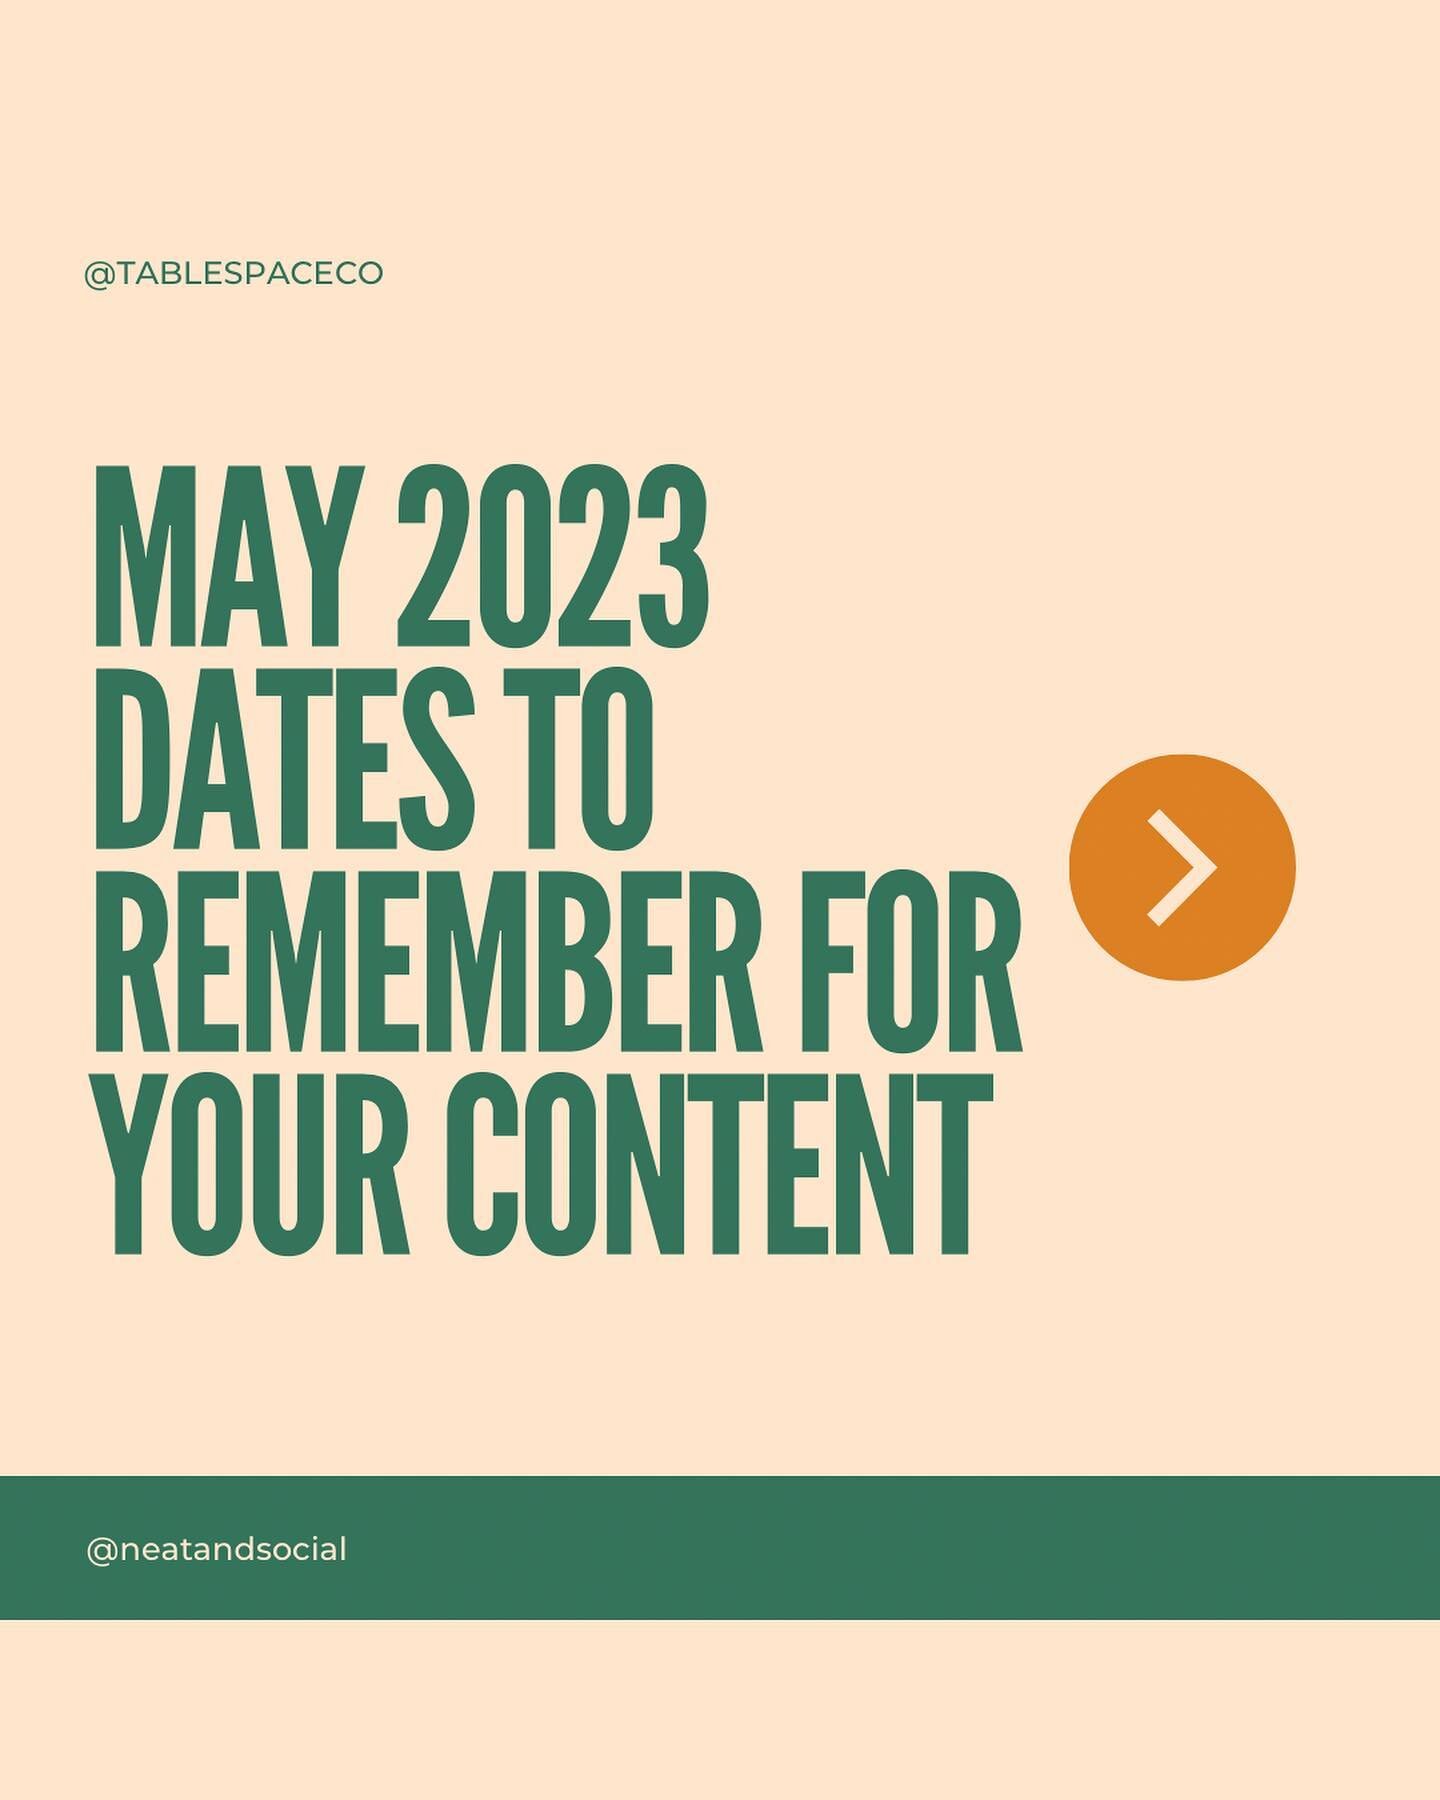 Planning in advance is crucial for content creation because it allows you to:

- Set clear goals.
- Save time.
- Ensure consistency.
- Avoid last-minute stress.

Swipe the carousel and start planning your May content!

Follow us for more tips!

@tabl